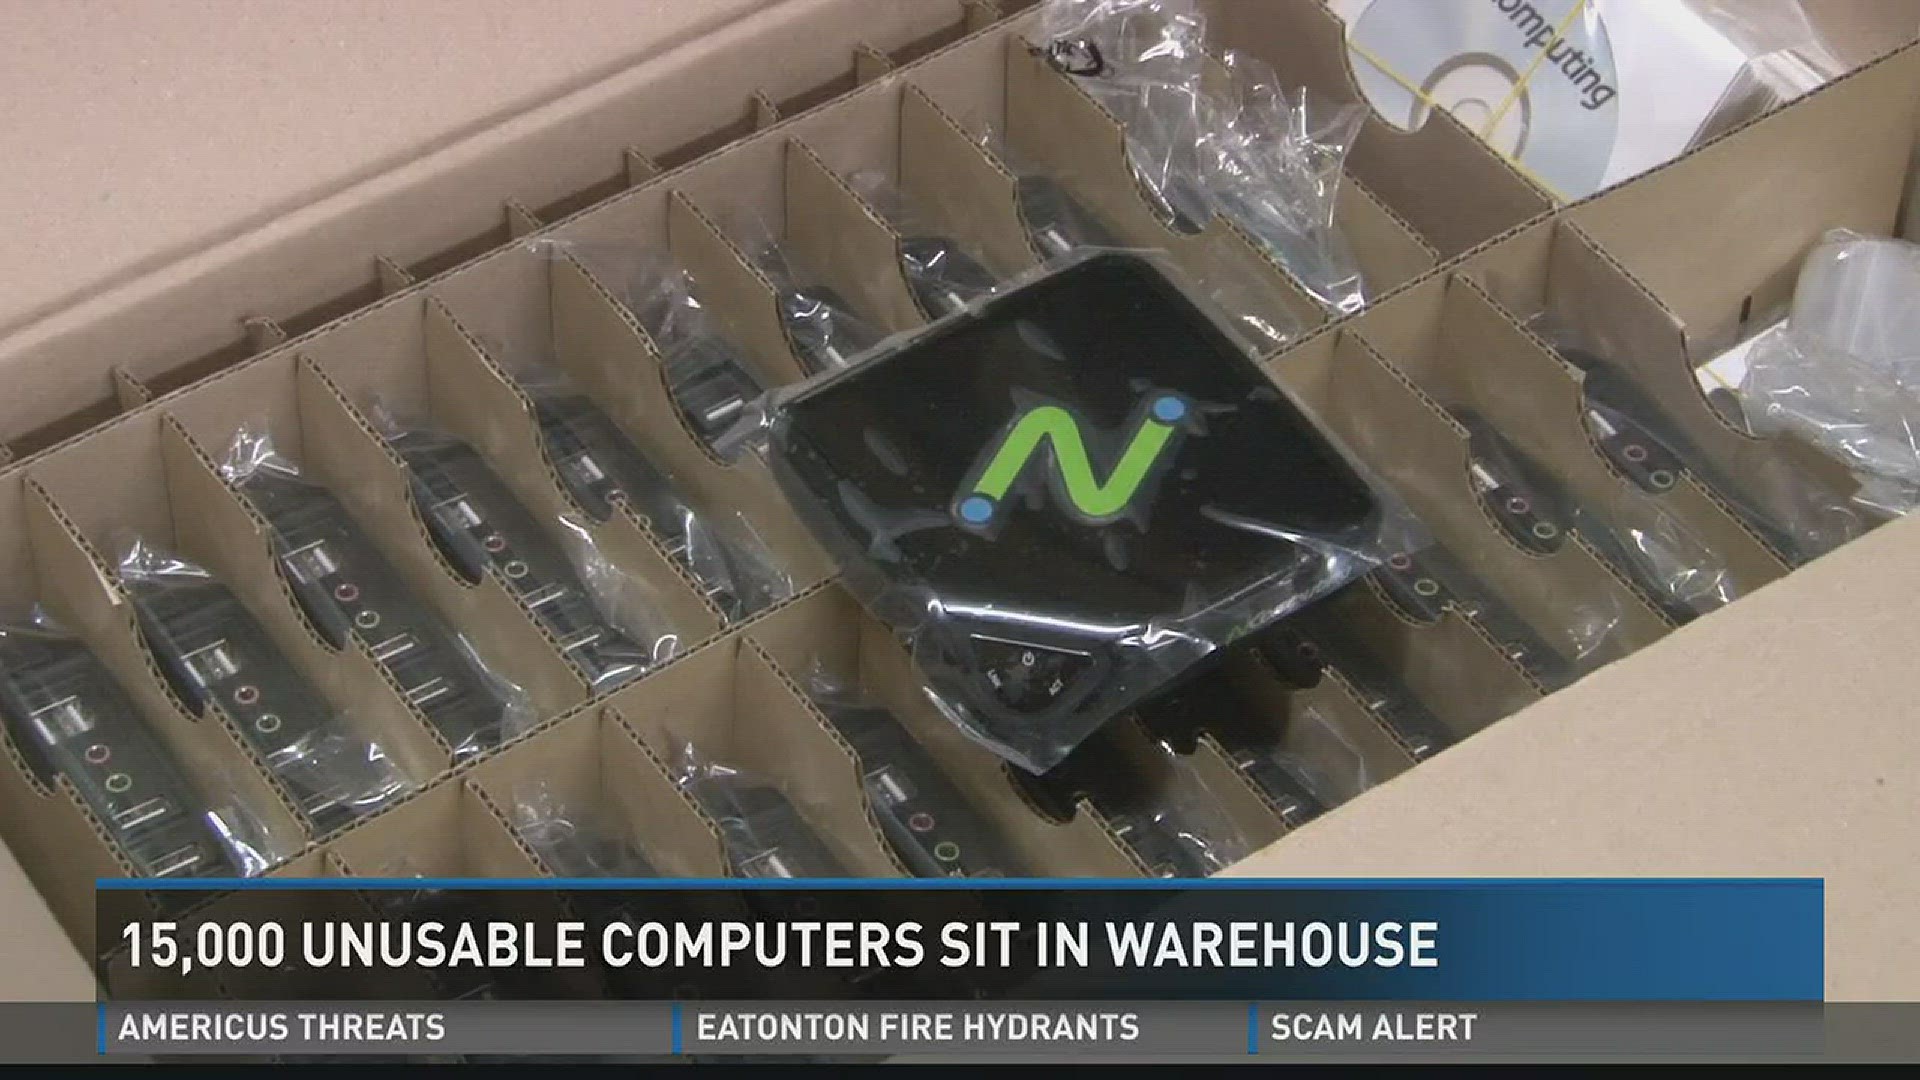 15,000 unusable computers sit in warehouse